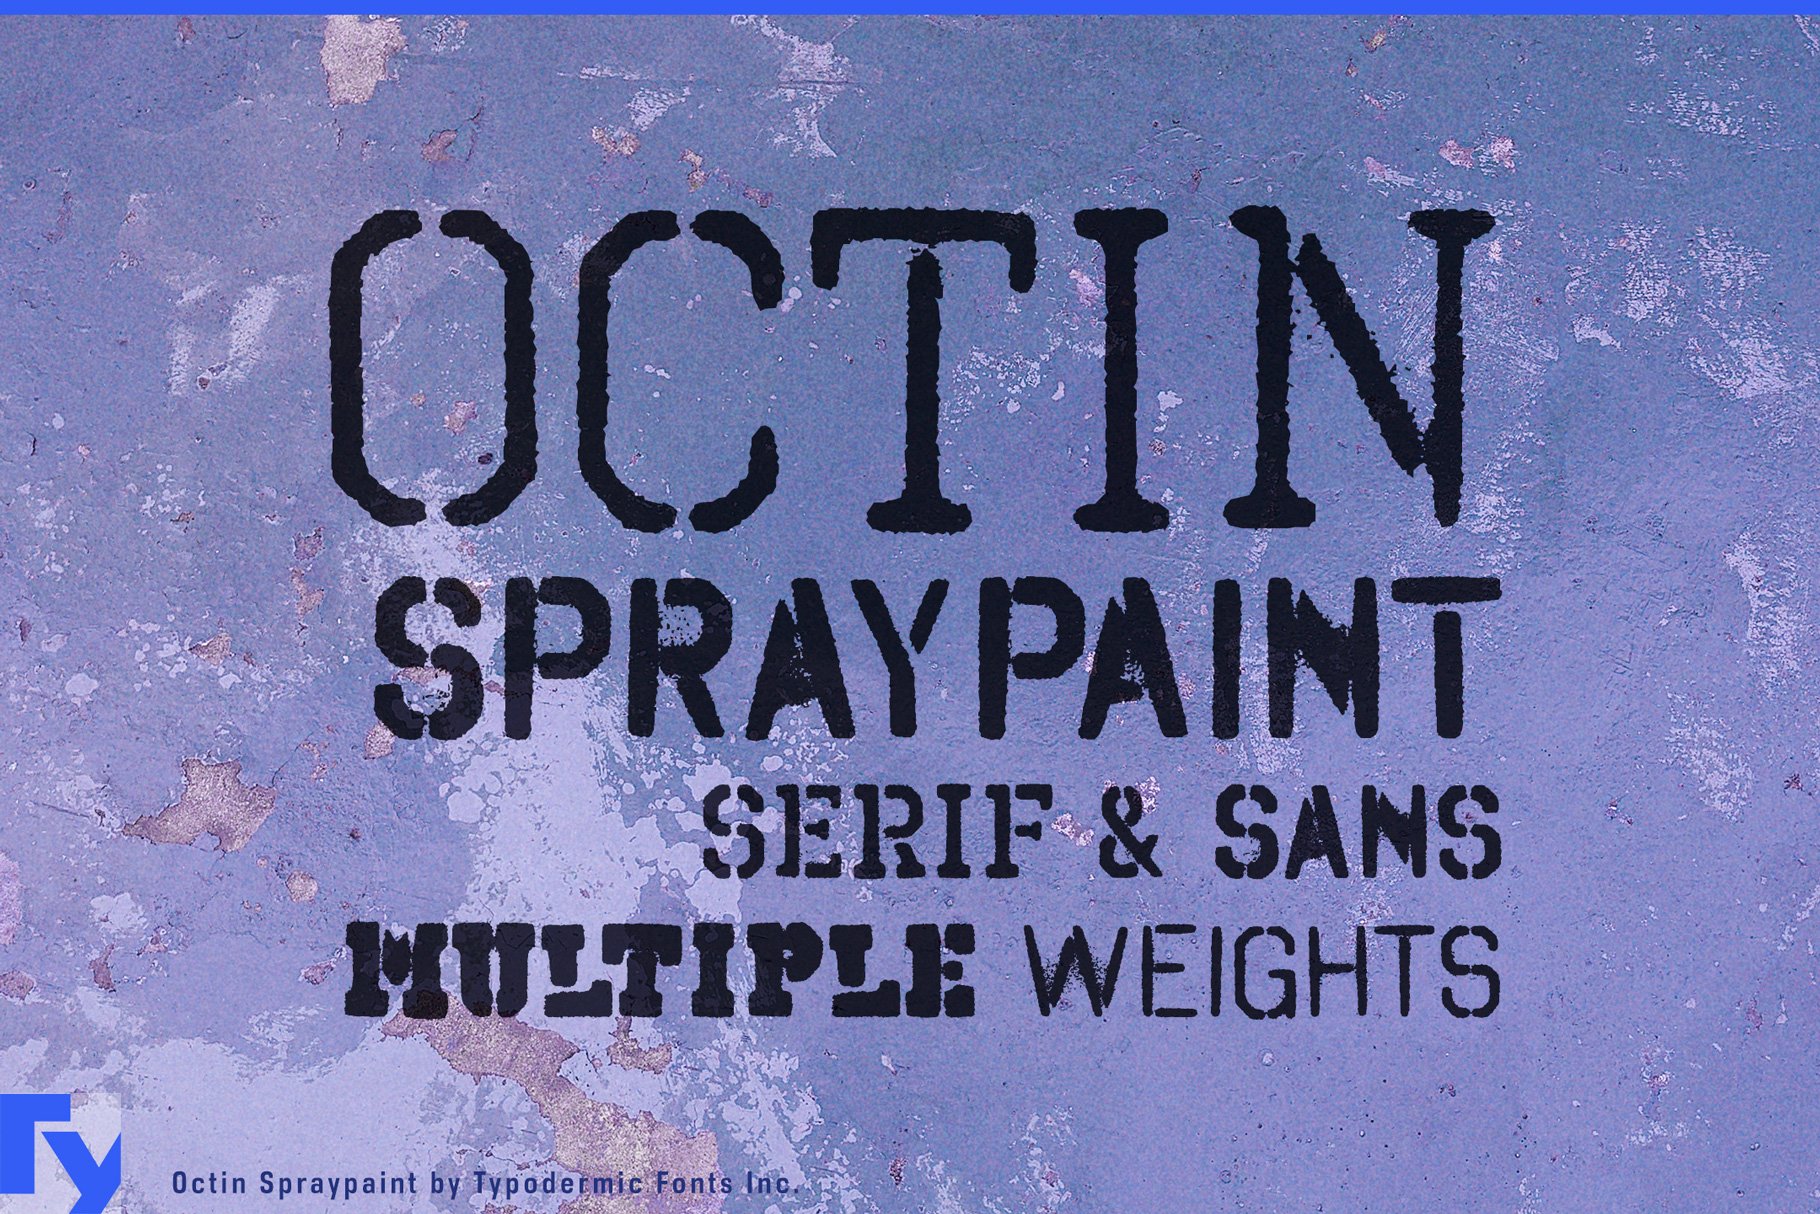 Octin Spraypaint cover image.